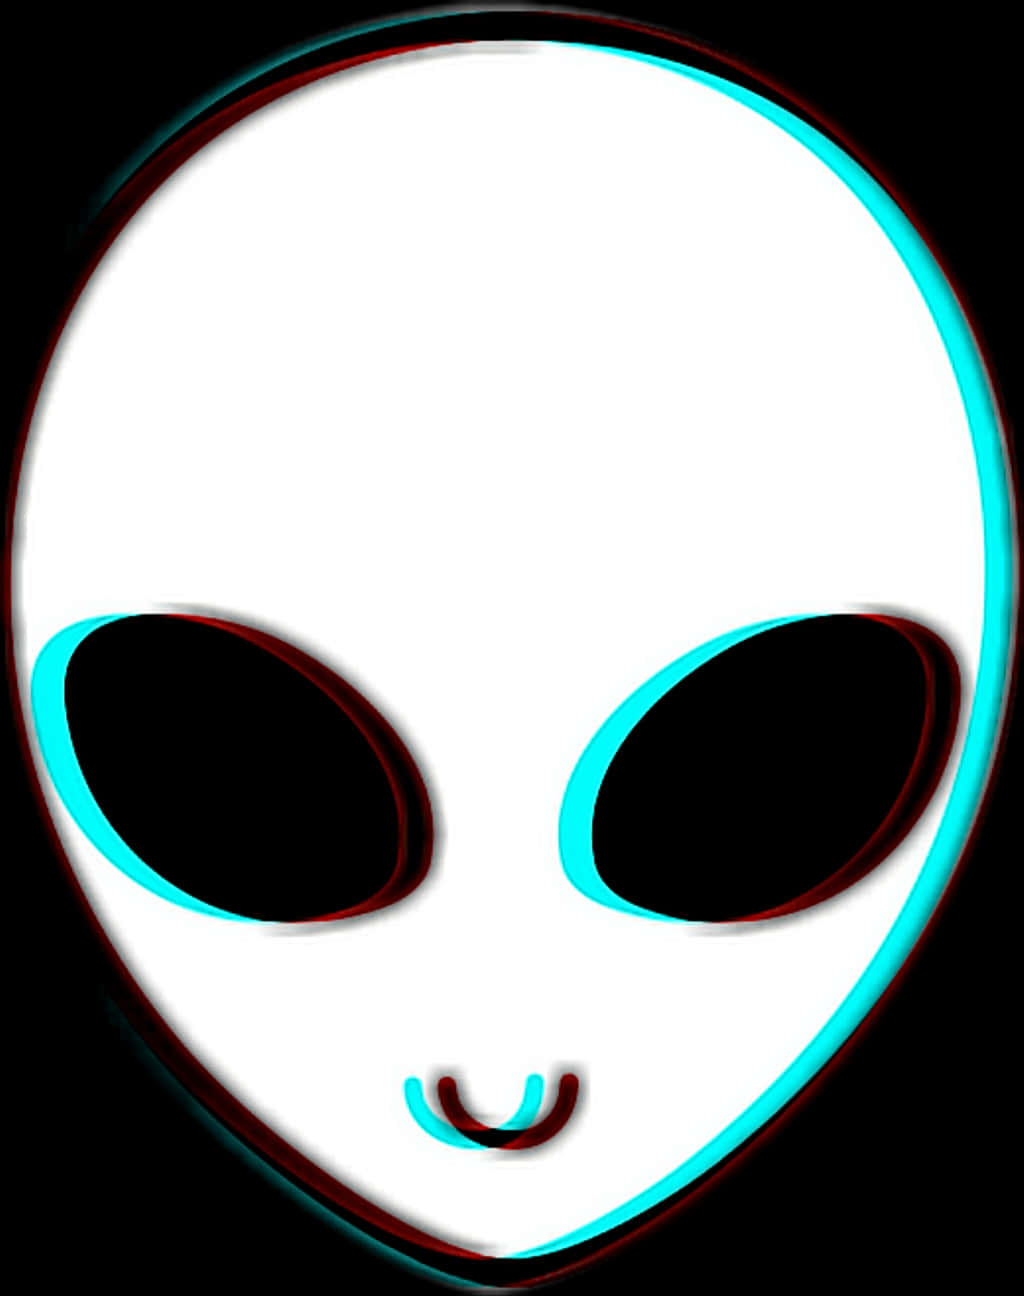 A White Alien Face With Black Eyes